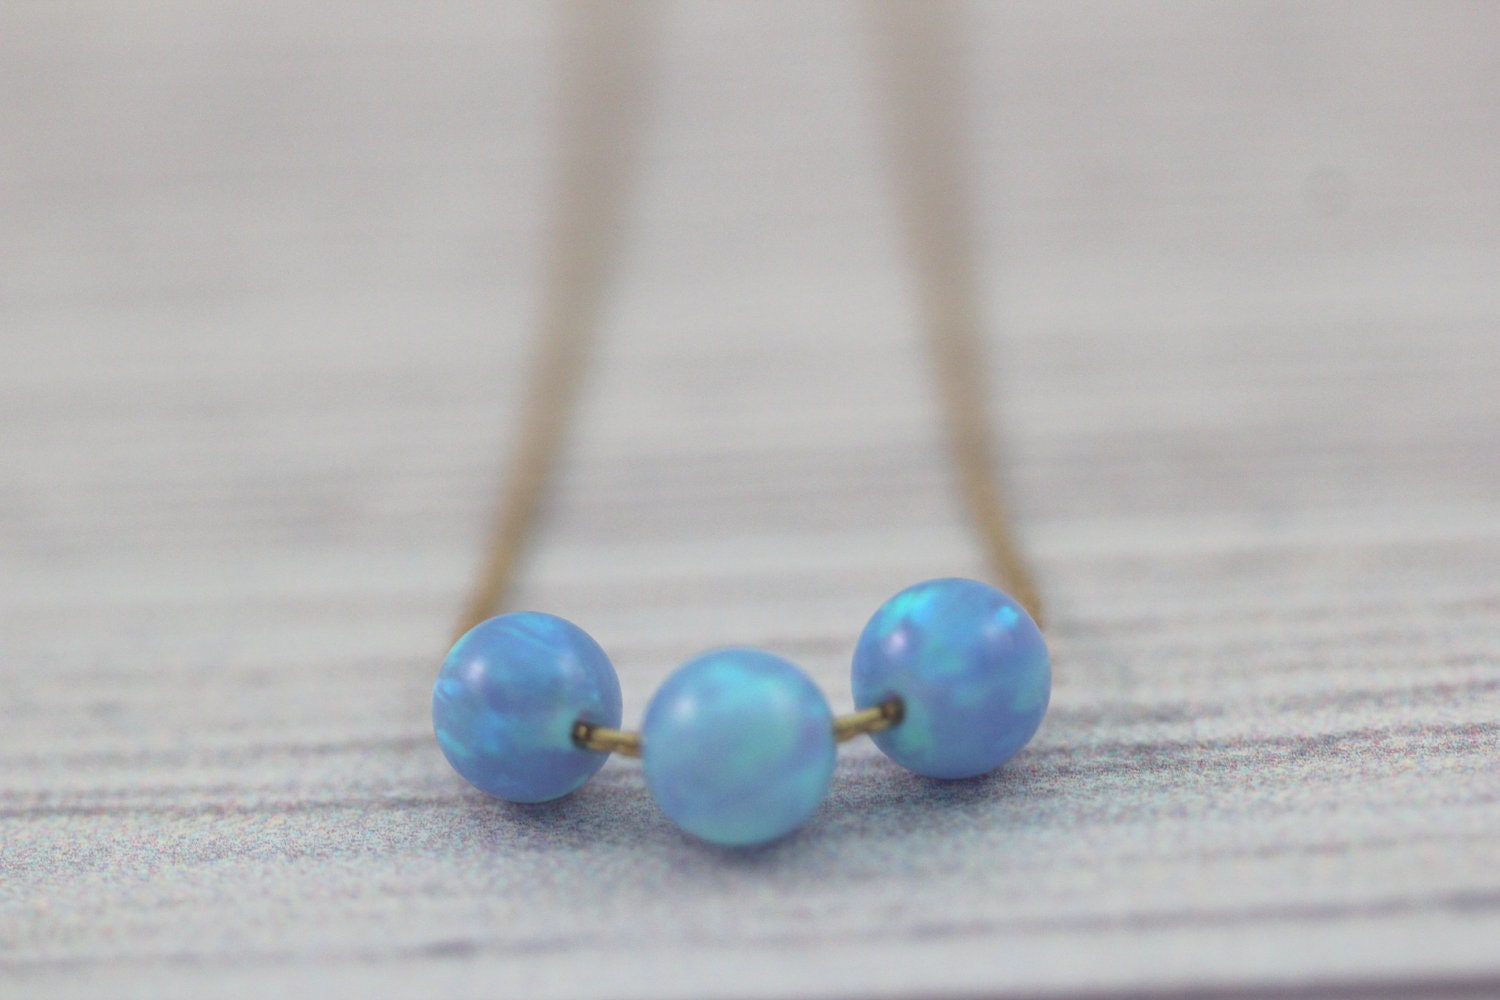 Natural Blue Opal Round 3mm Beads 4MM Loose B Bids For DIY Hand String  Accessories From Chenxun0809, $7.11